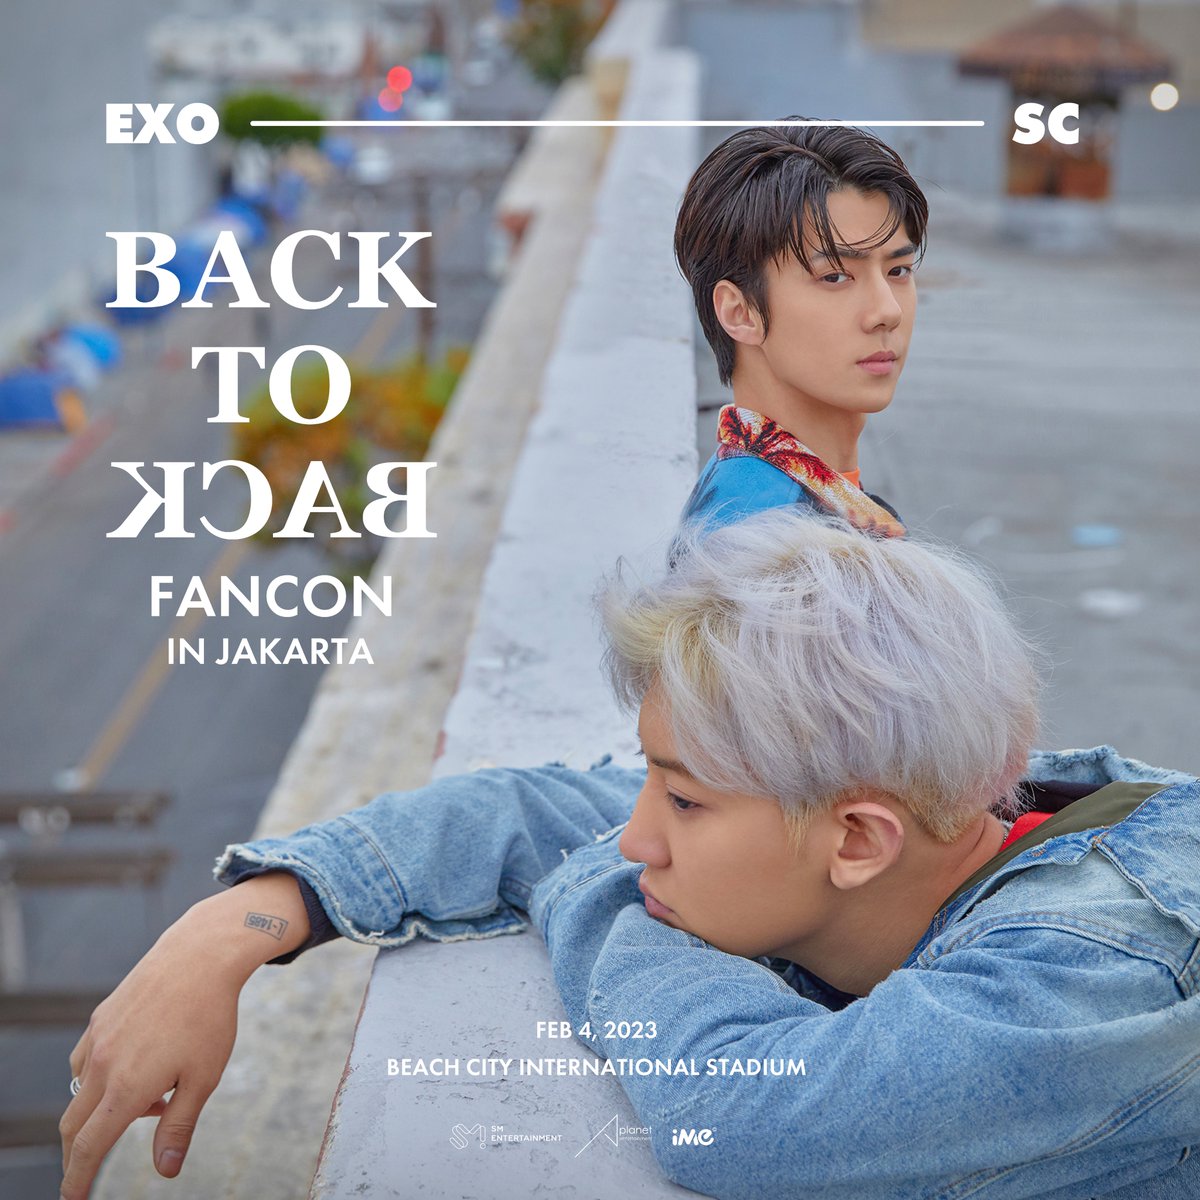 Indonesian EXO-L be ready, Sehun and Chanyeol will be back to Jakarta for EXO-SC BACK TO BACK FANCON!

Stay tune for more info.

#EXO #EXOSC #EXOSC_BackToBack #iMeIndonesia